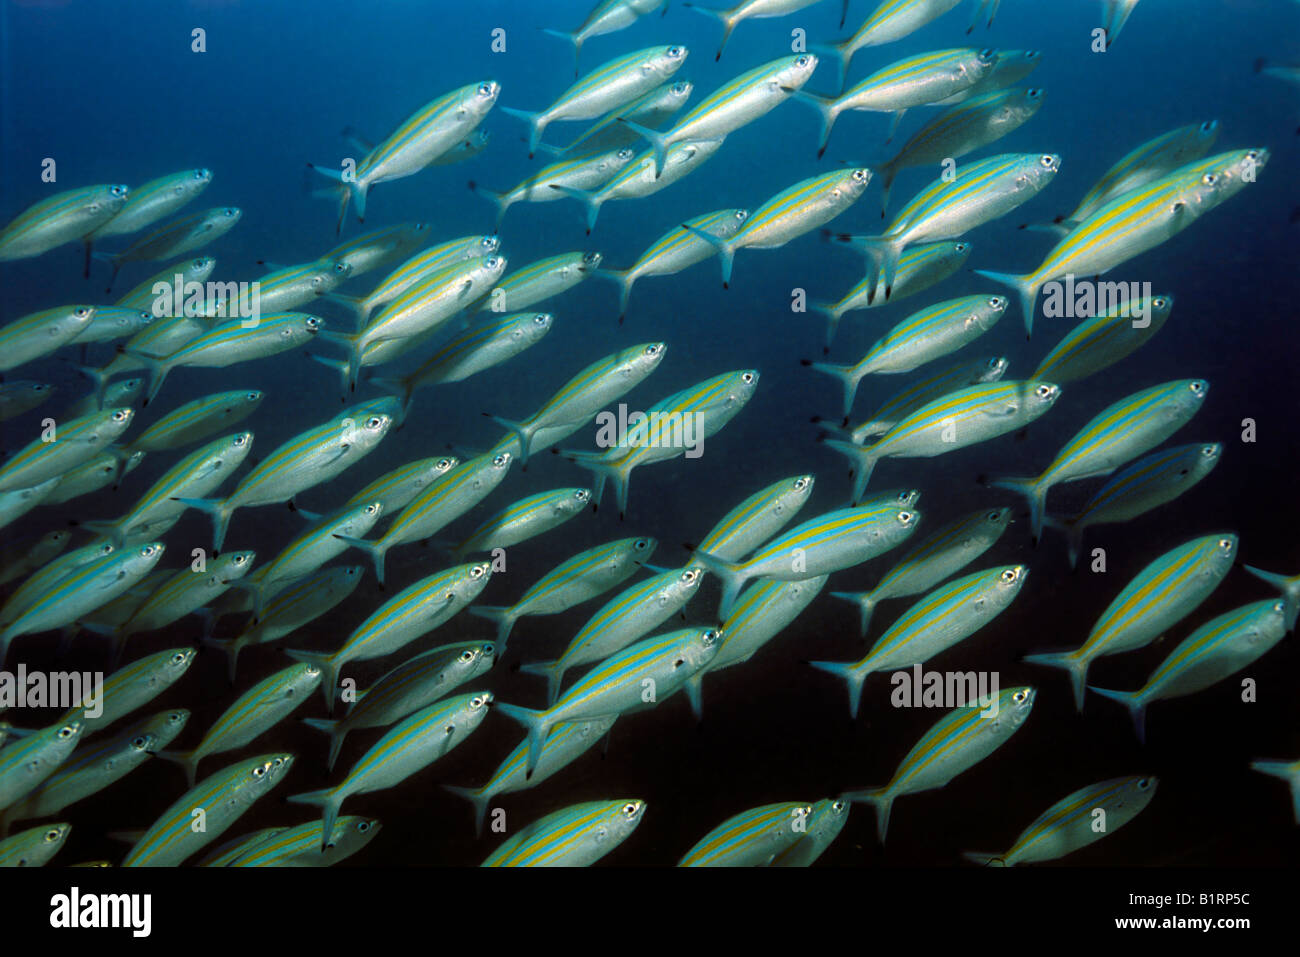 School of Variable-lined Fusilier fish (Caesio varilineata) swimming over a coral reef, Oman, Middle East, Indian Ocean Stock Photo